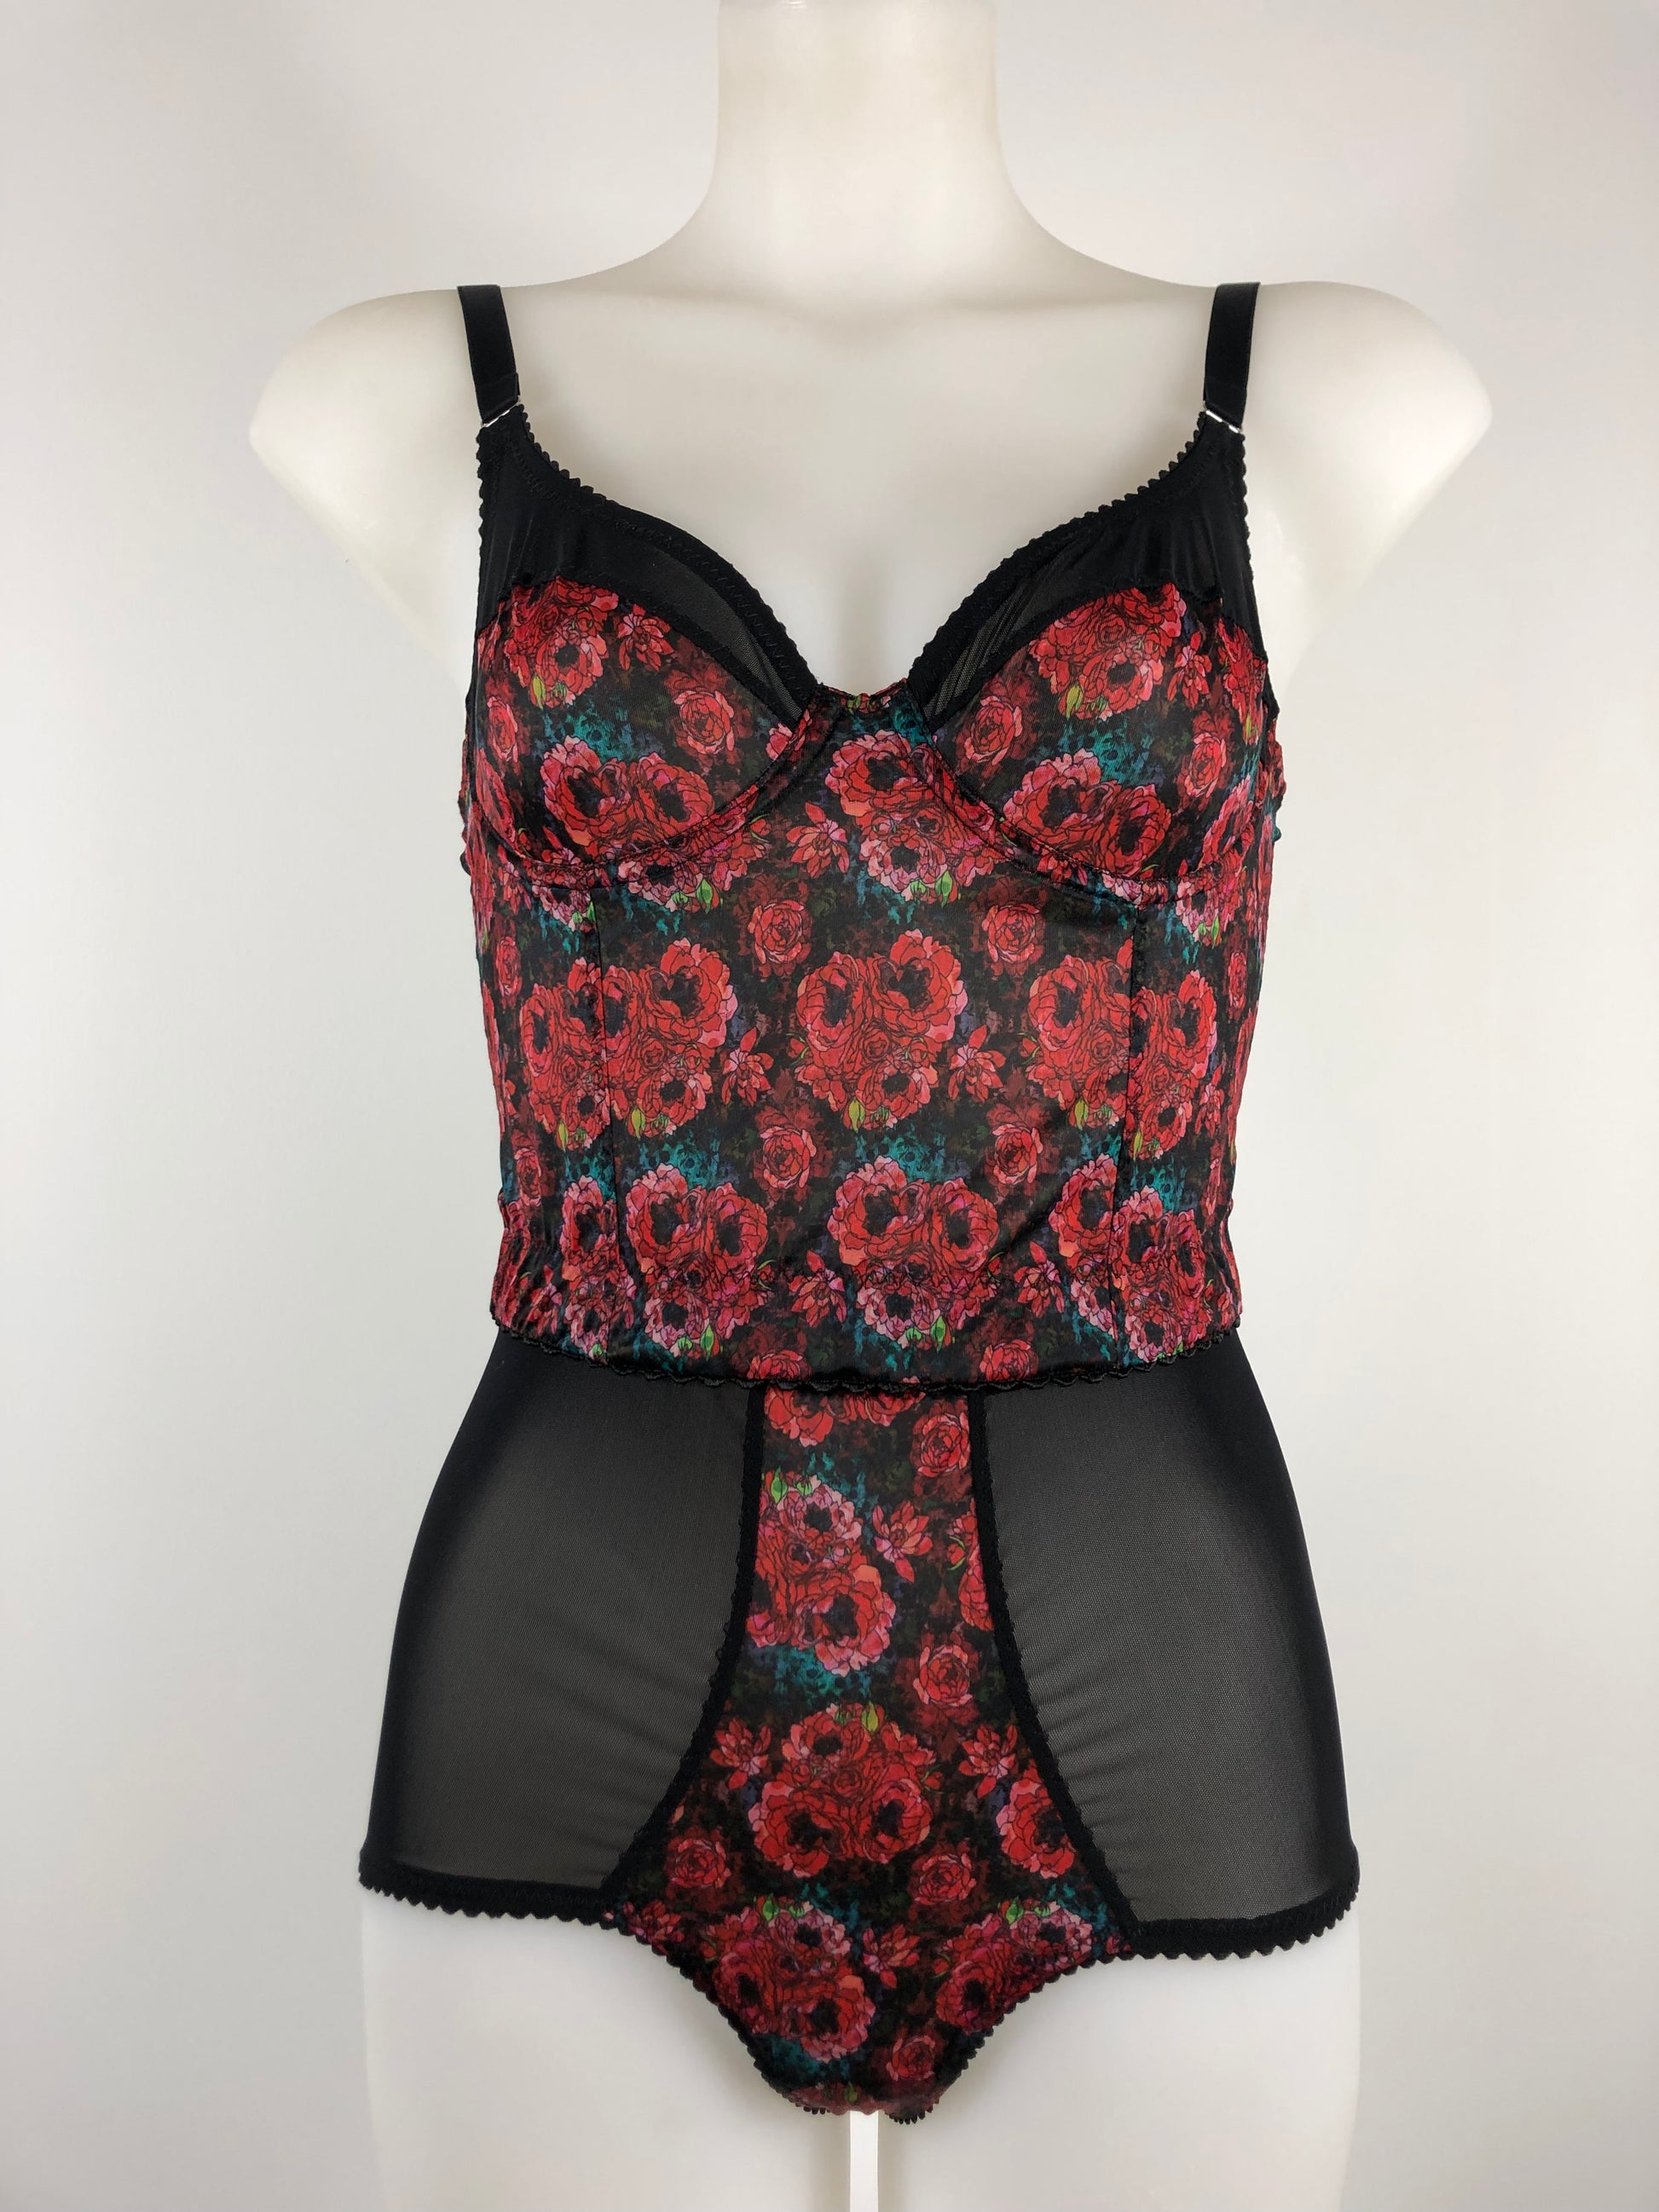 love witch inspired lingerie set. high waisted knicker  pantie girdle inspired by the anna biller film. Used a rich red floral brocade style pattern with black mesh and trims. Ideal gothic, spiritual, witchy underwear